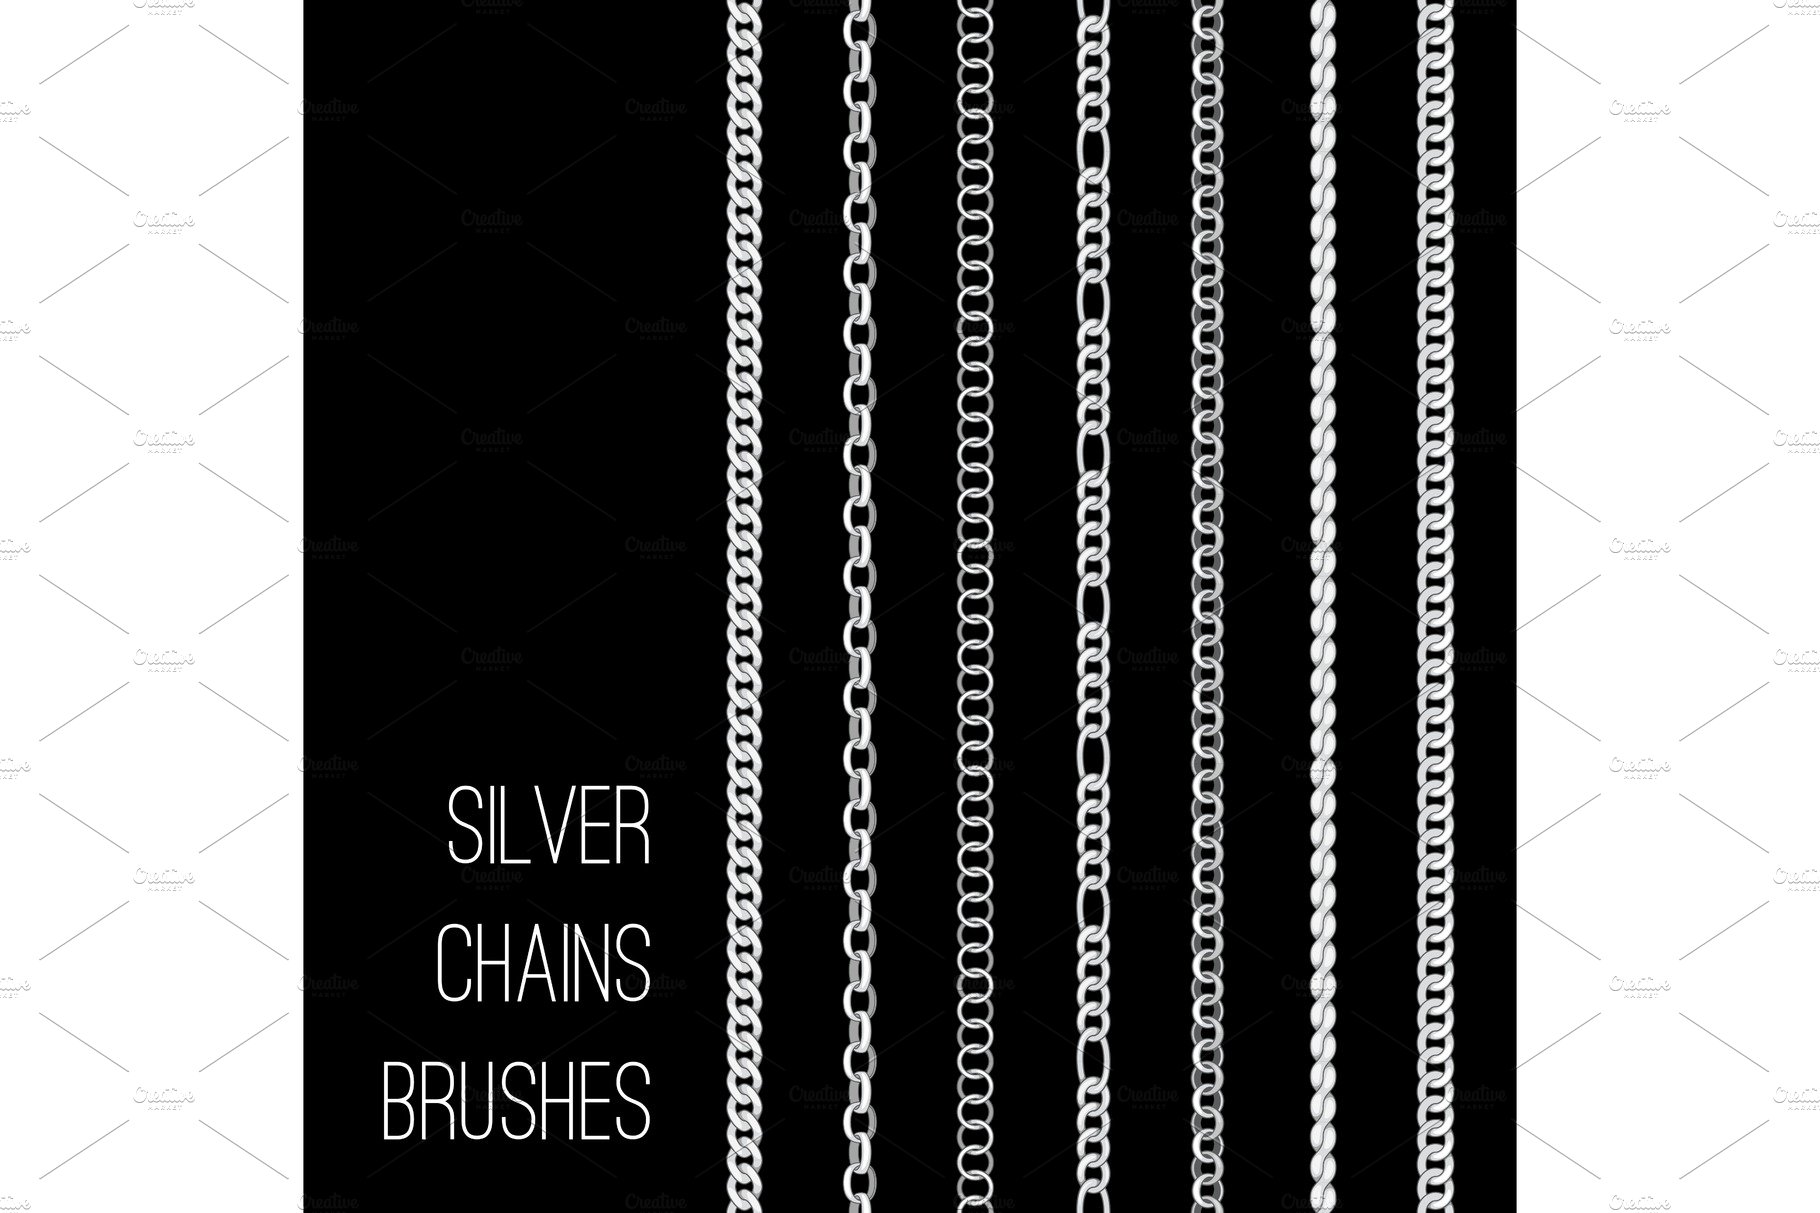 Silver chains set isolated on black cover image.